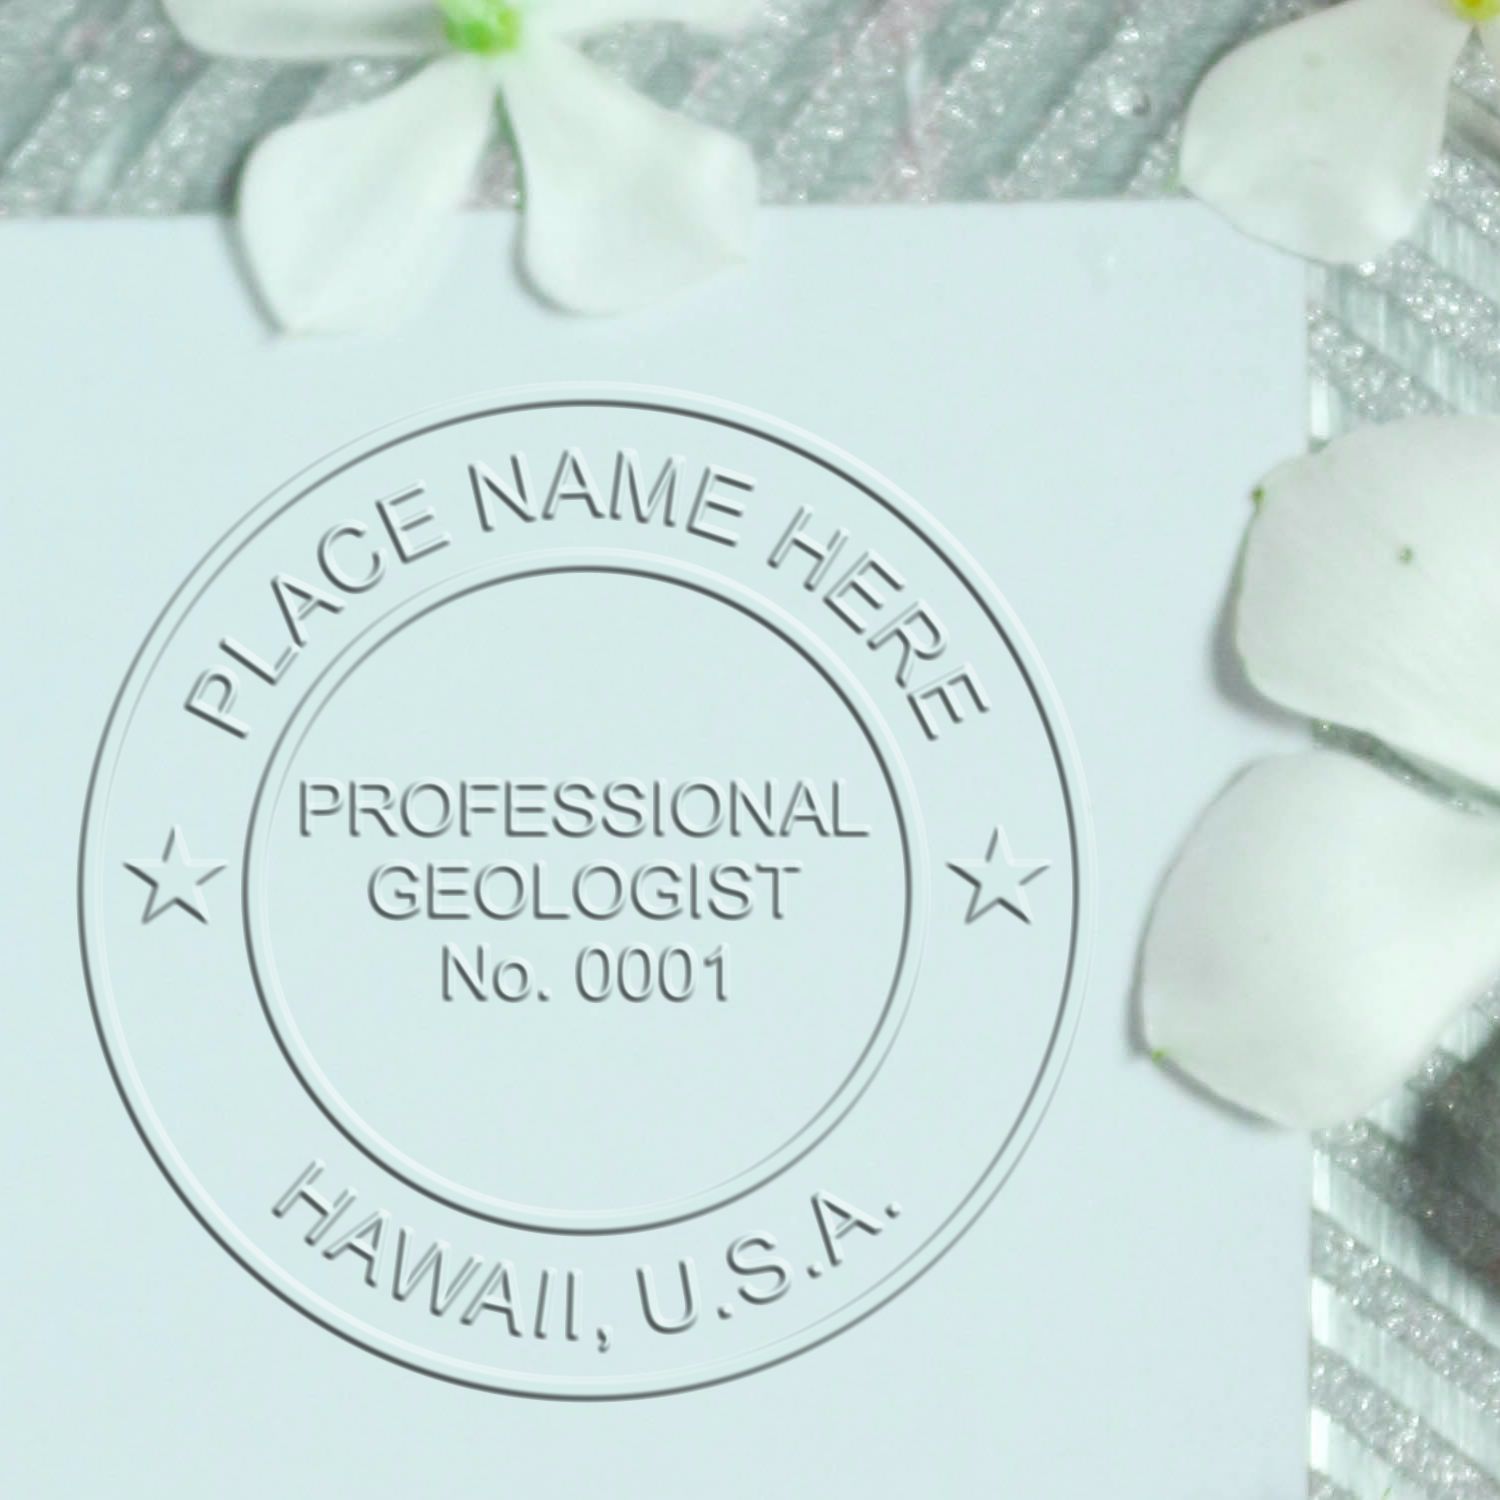 The main image for the State of Hawaii Extended Long Reach Geologist Seal depicting a sample of the imprint and imprint sample